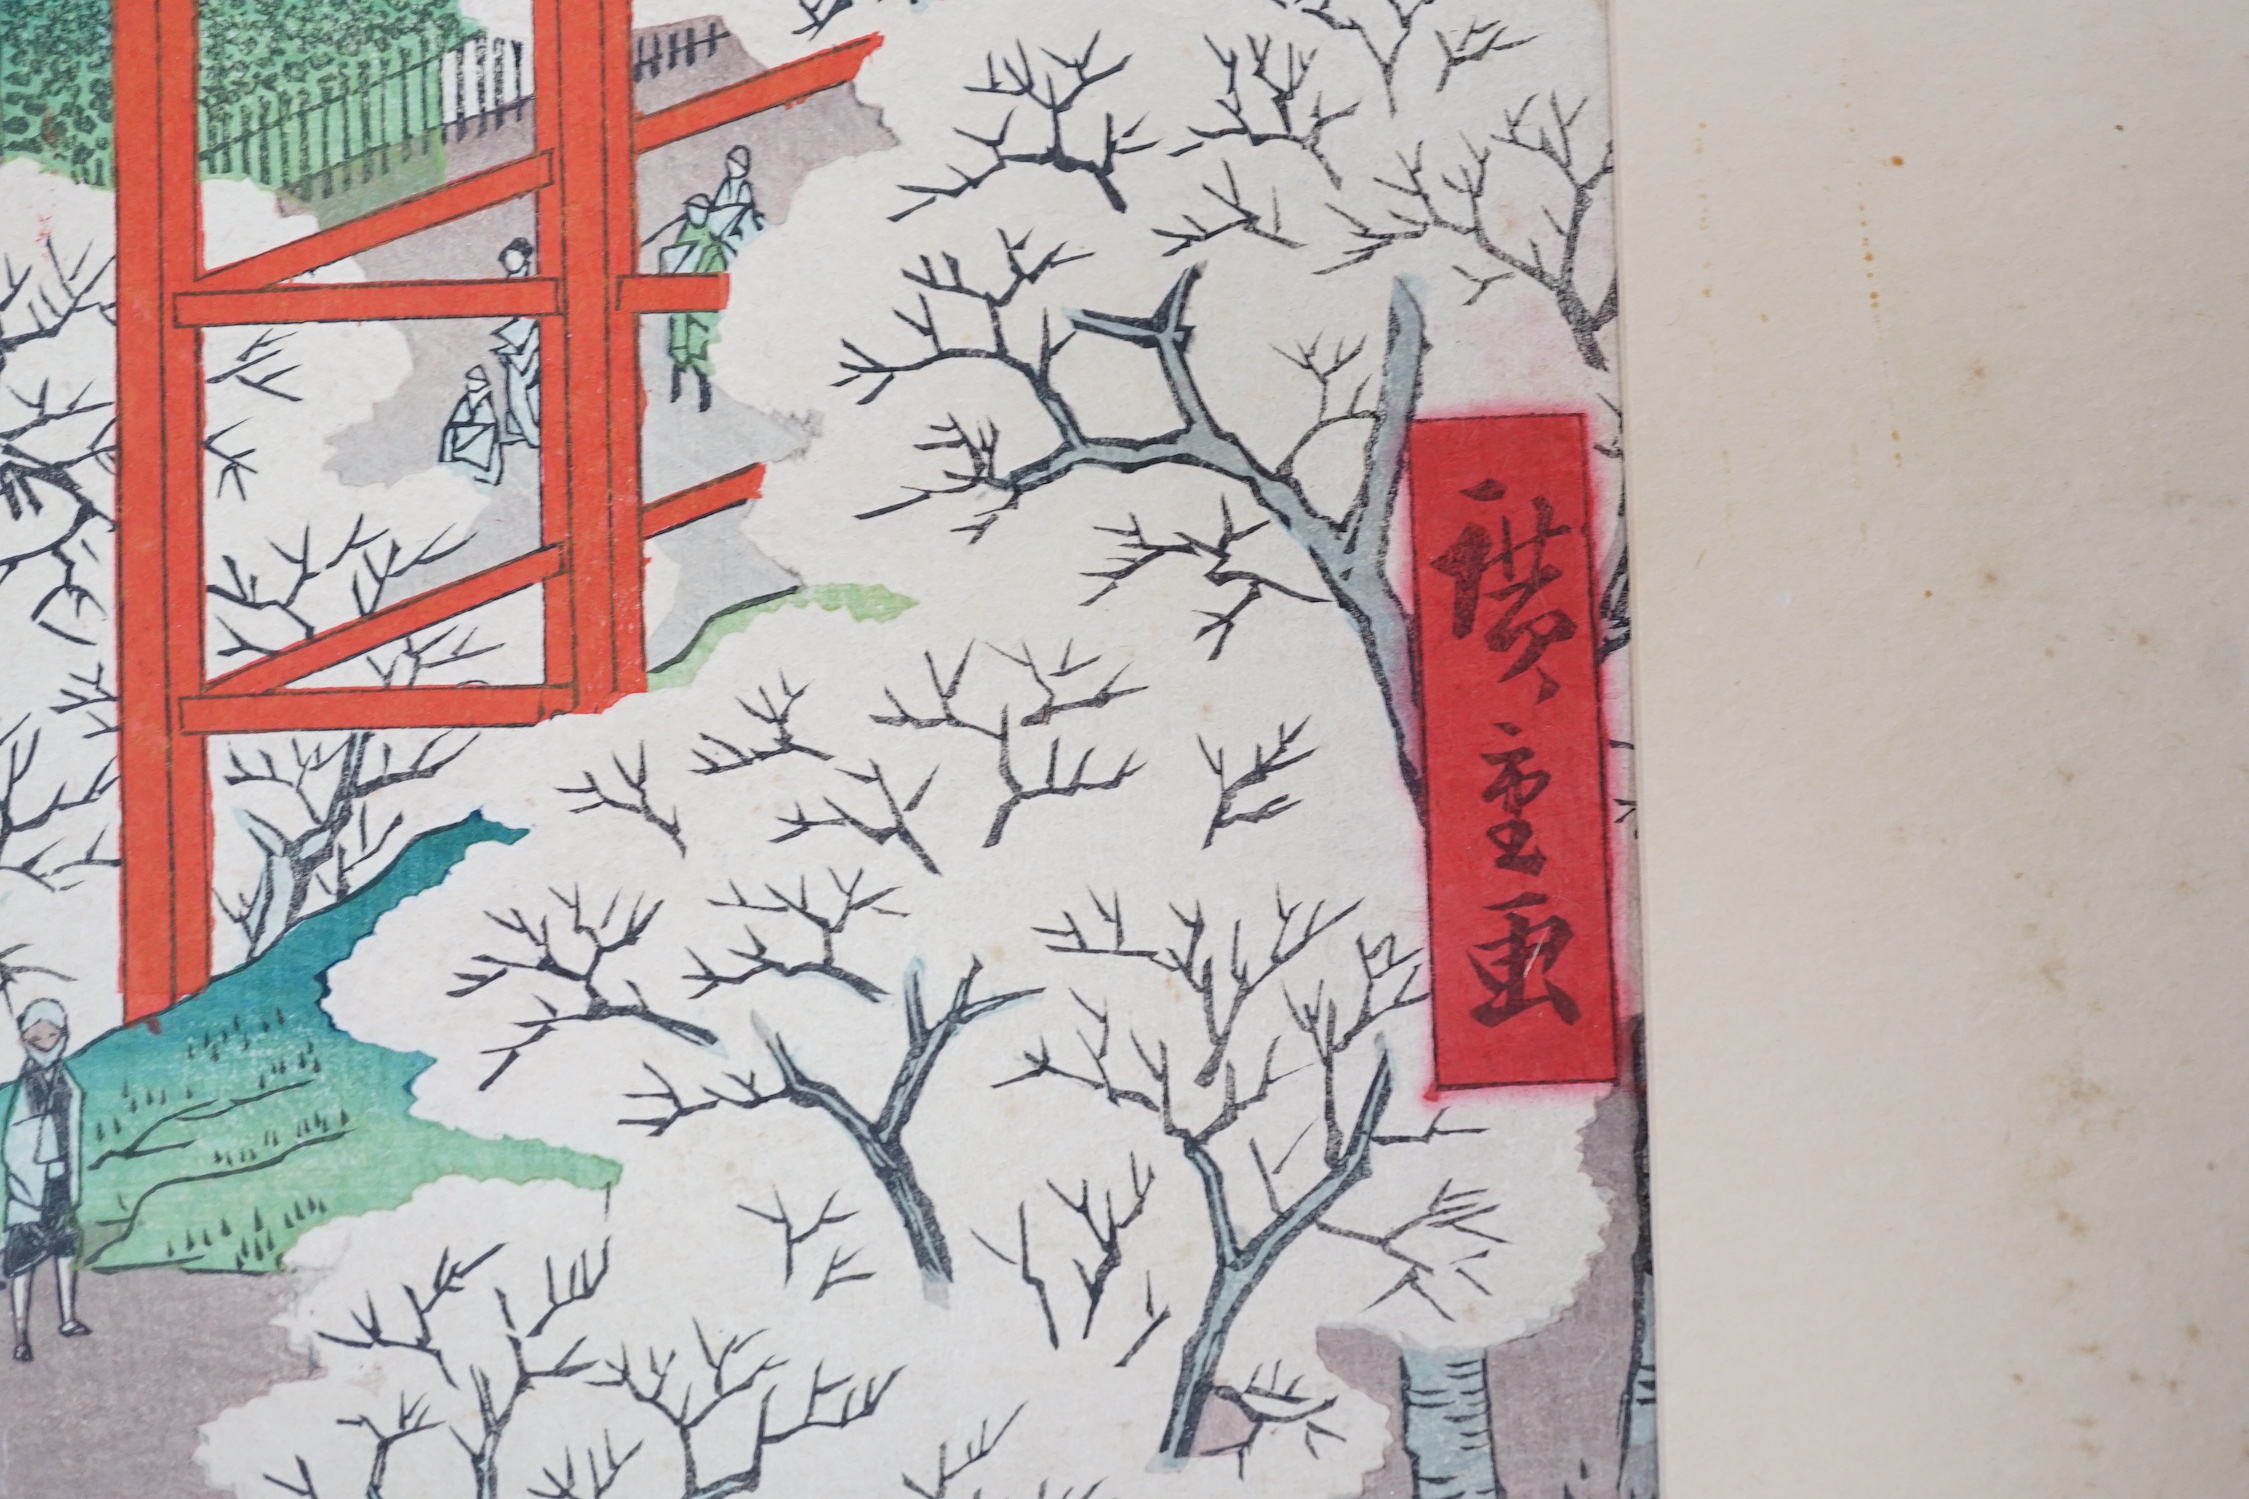 After Hiroshige, two woodblock prints, 'Shrine of Benten' and 'Shinobazu Pond', another print of four figures and a pair of fan leaf designs, largest overall 33 x 53cm, unframed